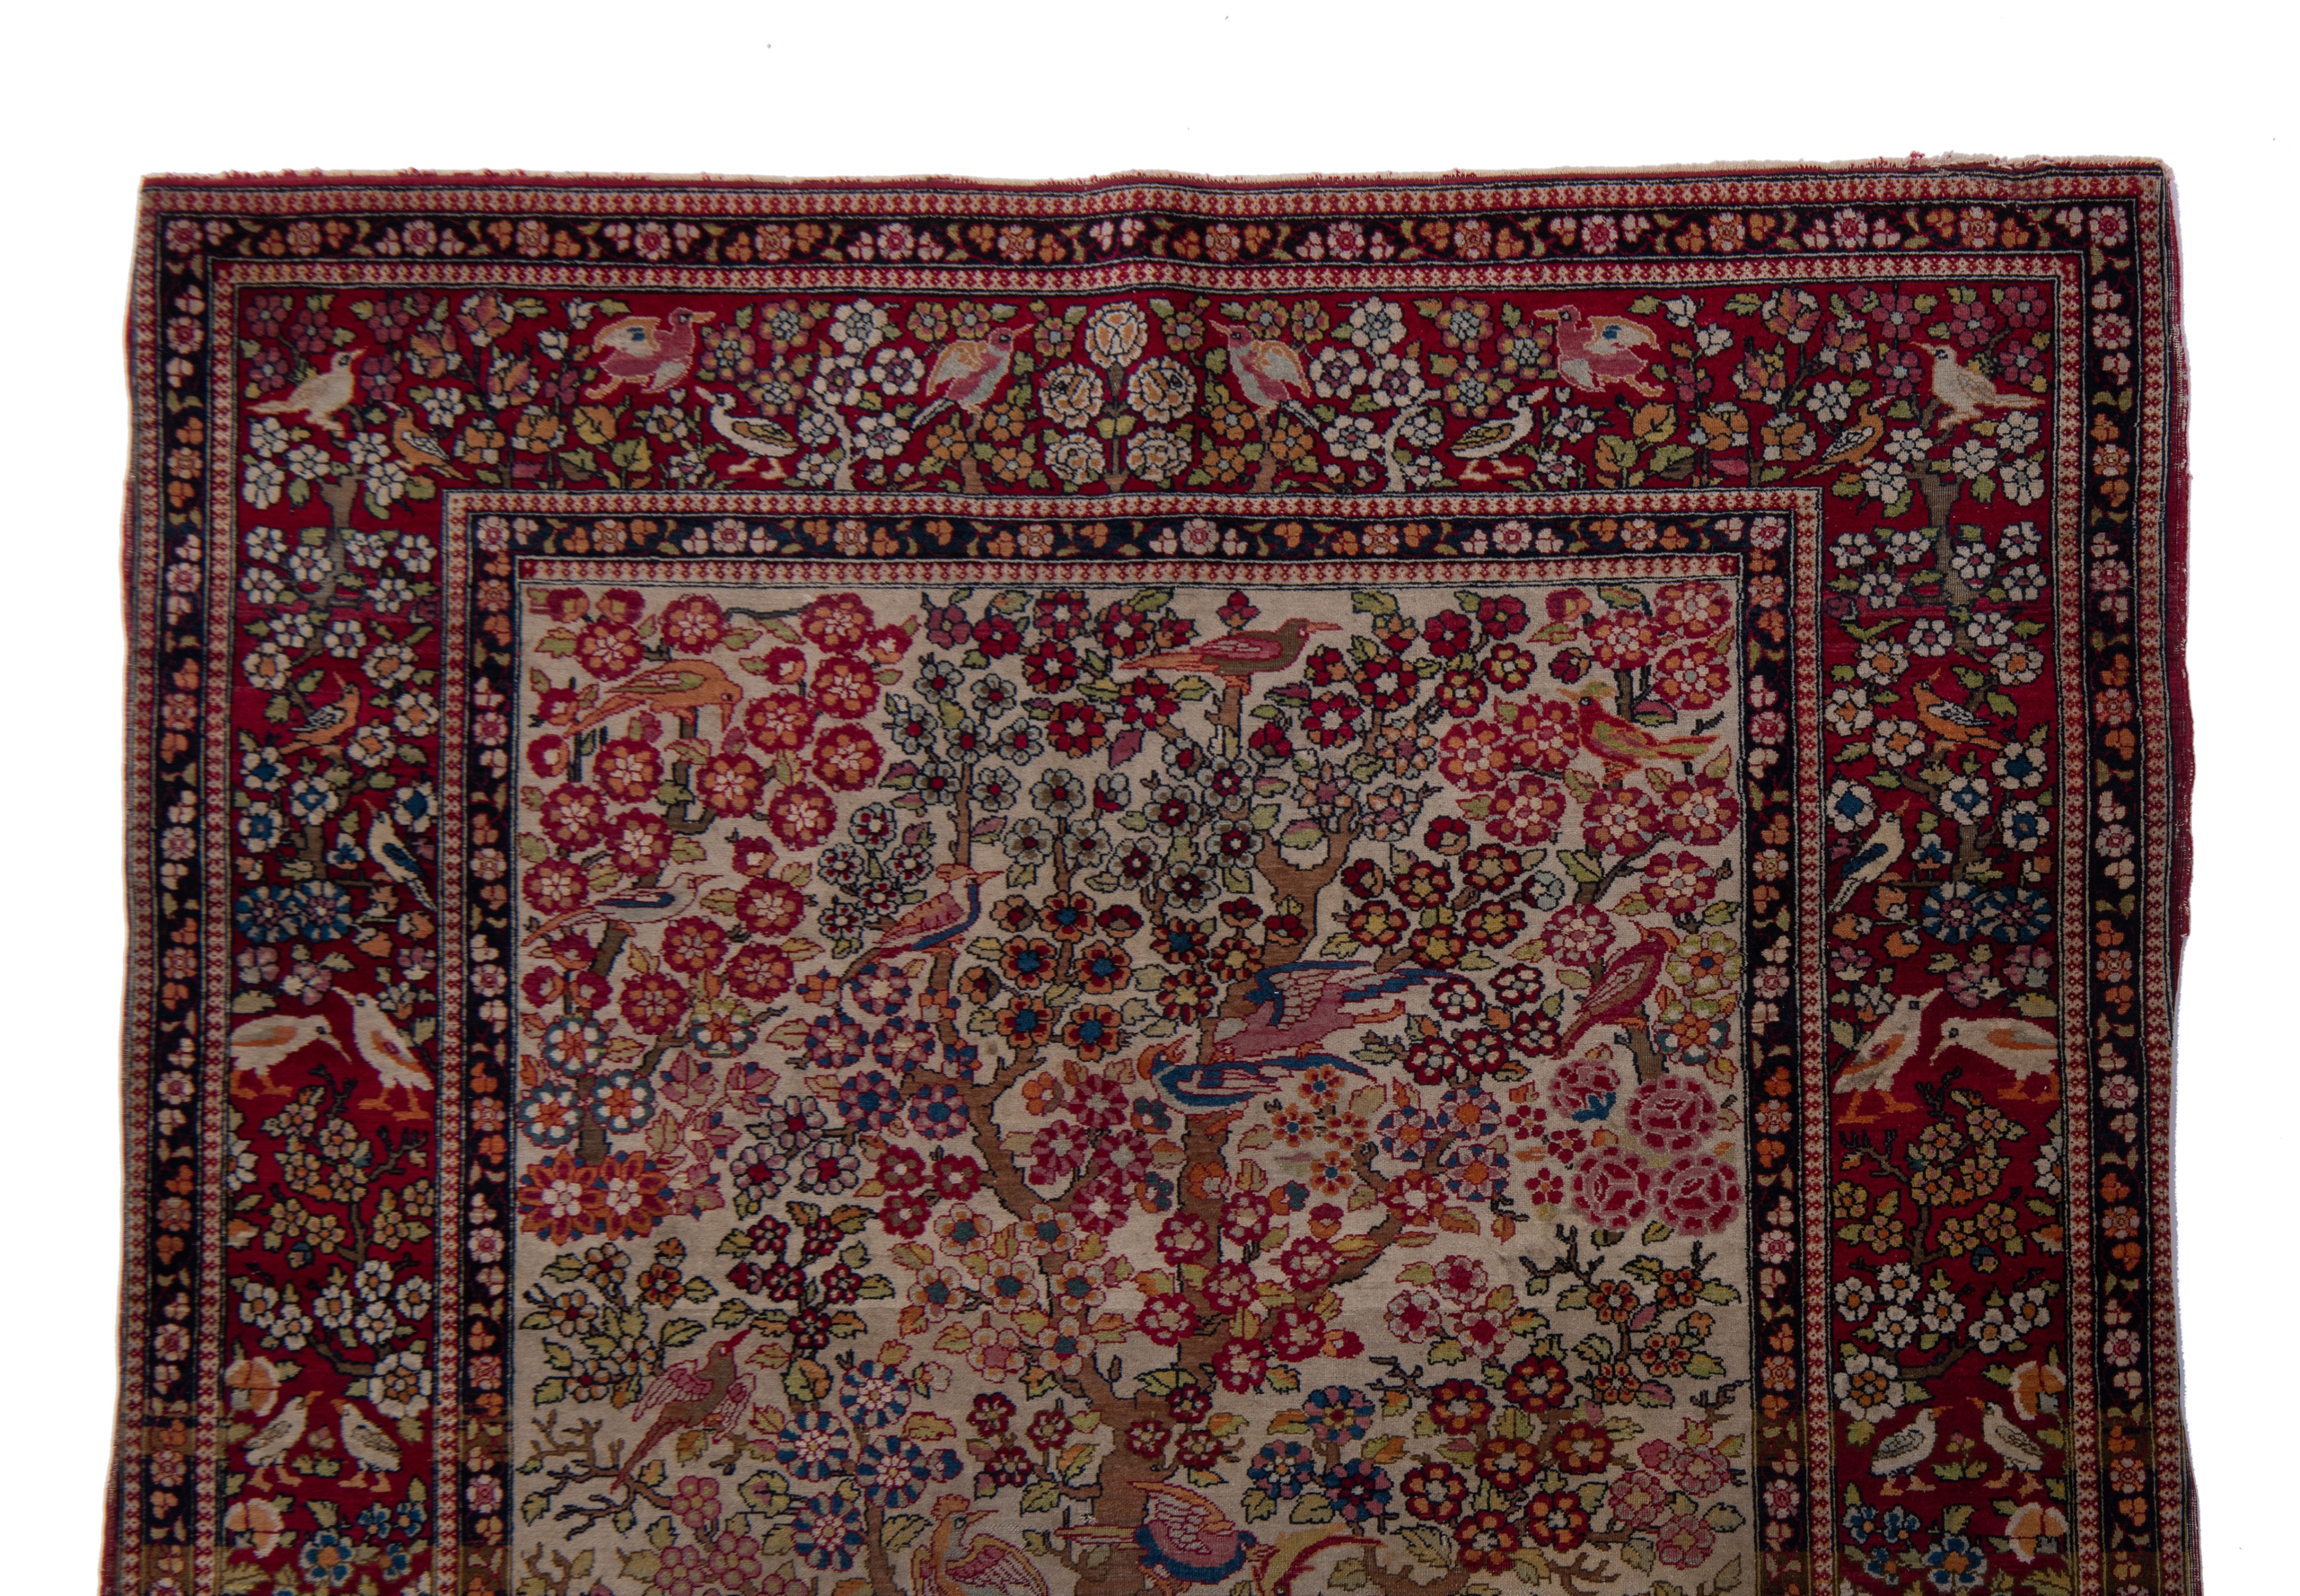 An antique Persian Ispahan rug, depicting the tree of life, 137 x 206 cm (+) - Image 5 of 7